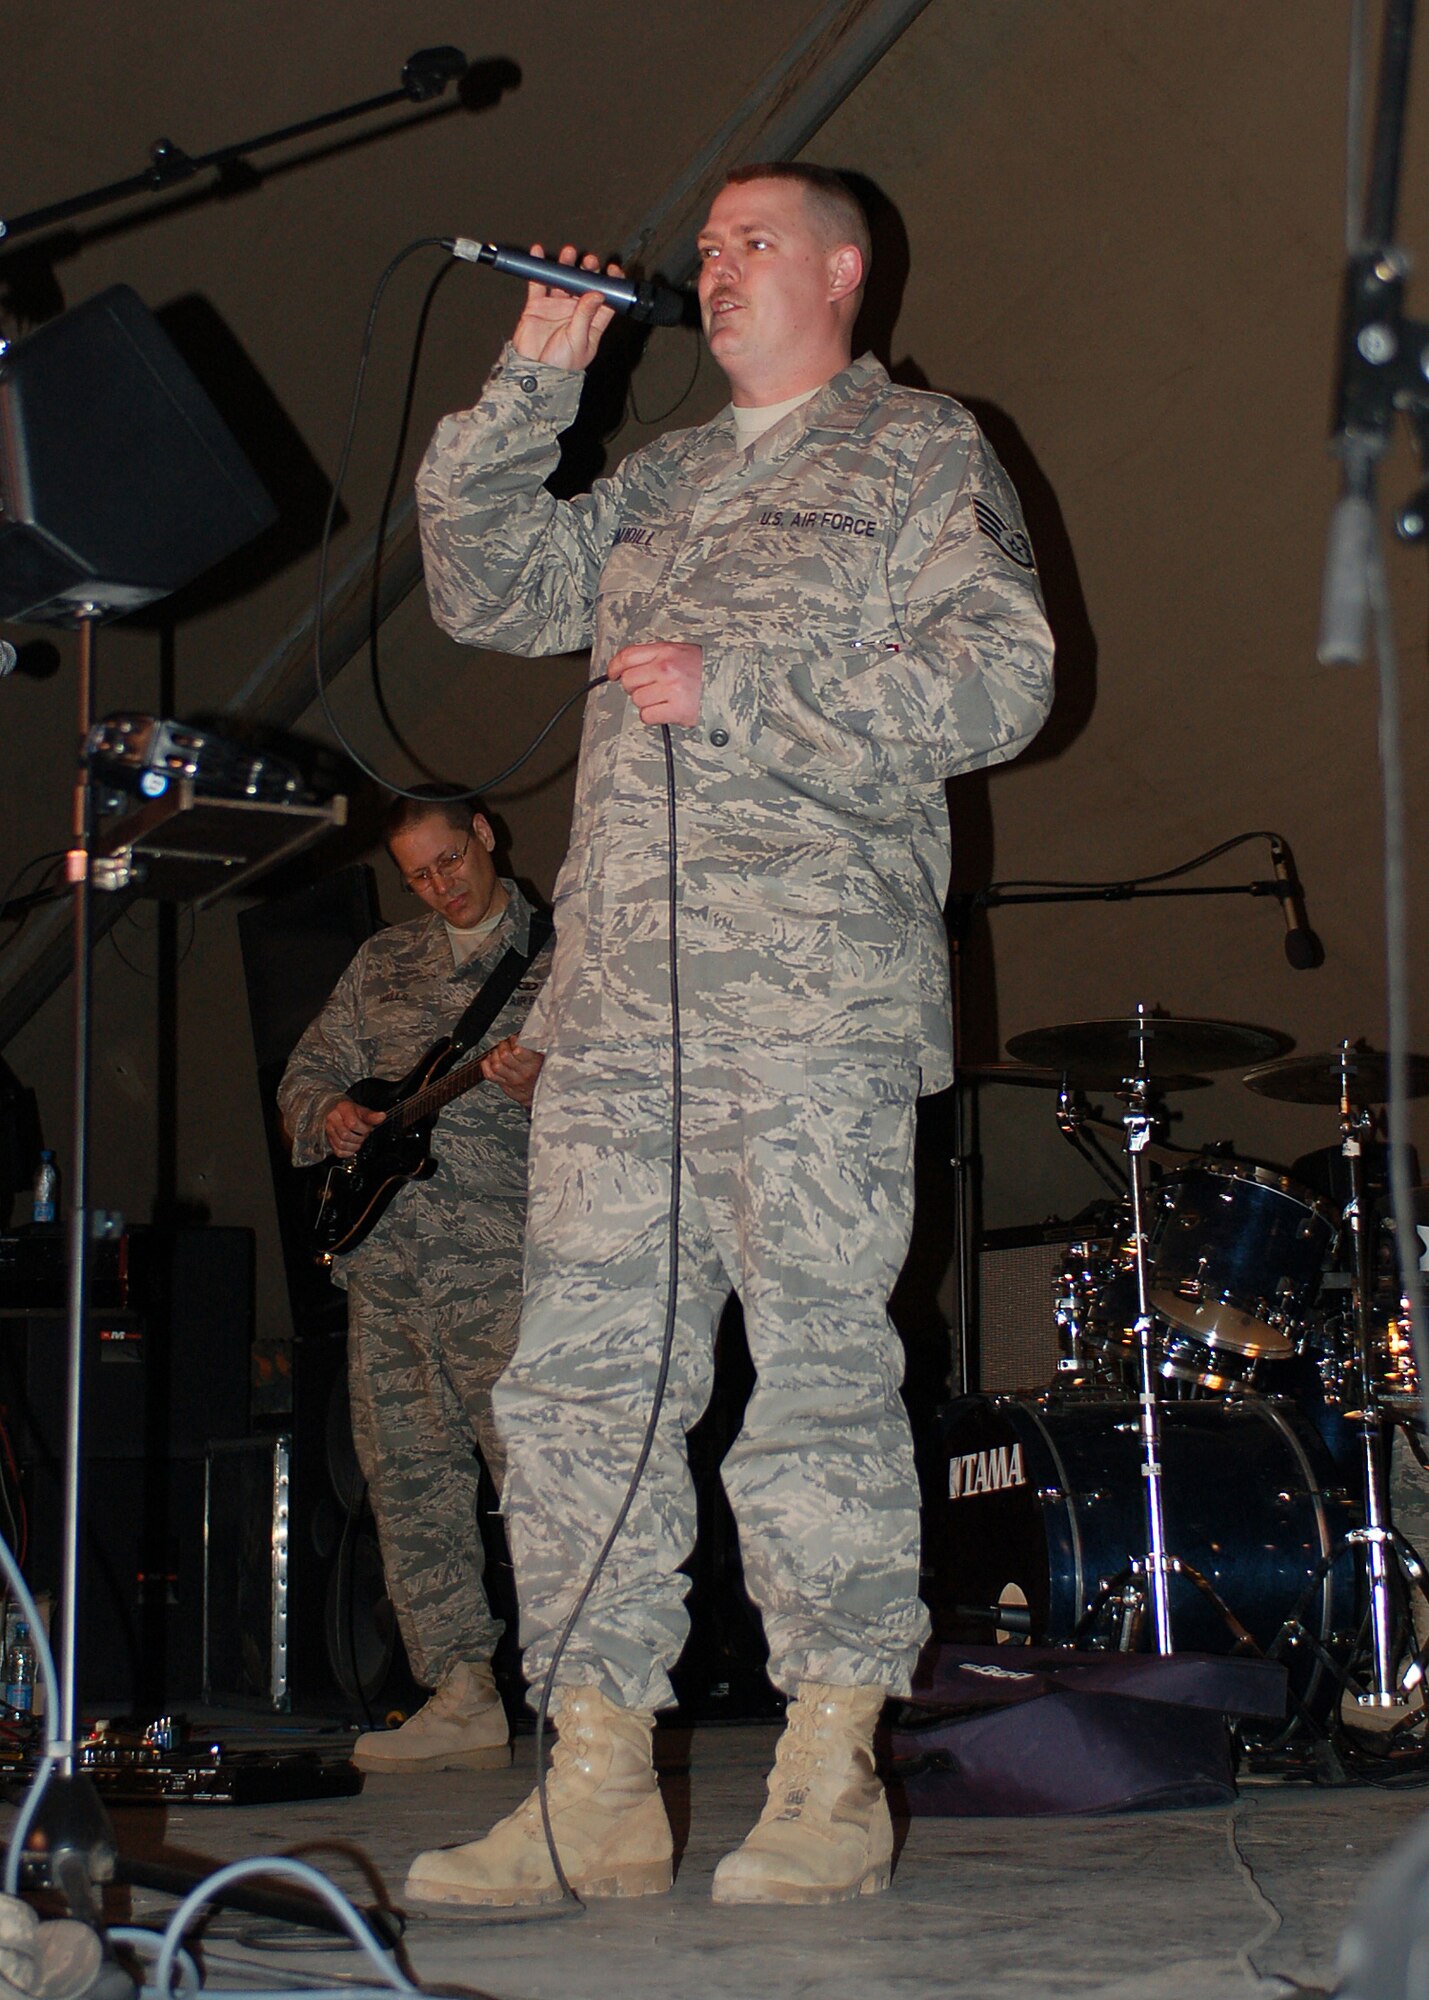 Staff Sgt. Eric Caudill belts out a tune as a guest vocalist during a performance by the band Sirocco, a U.S. Air Forces Central Expeditionary Band, during their final show at Manas Air Base, Kyrgyzstan, March 21. Sirocco is deployed to Southwest Asia from the U.S. Air Forces in Europe Band at Sembach AB, Germany. Sergeant Caudill is assigned to the 22md Expeditionary Air Refueling Squadron and is deployed from Elmendorf Air Force Base, Alaska.  He is a native of Warner Robins, Ga. (U.S. Air Force photo/Tech. Sgt. Elizabeth Weinberg)